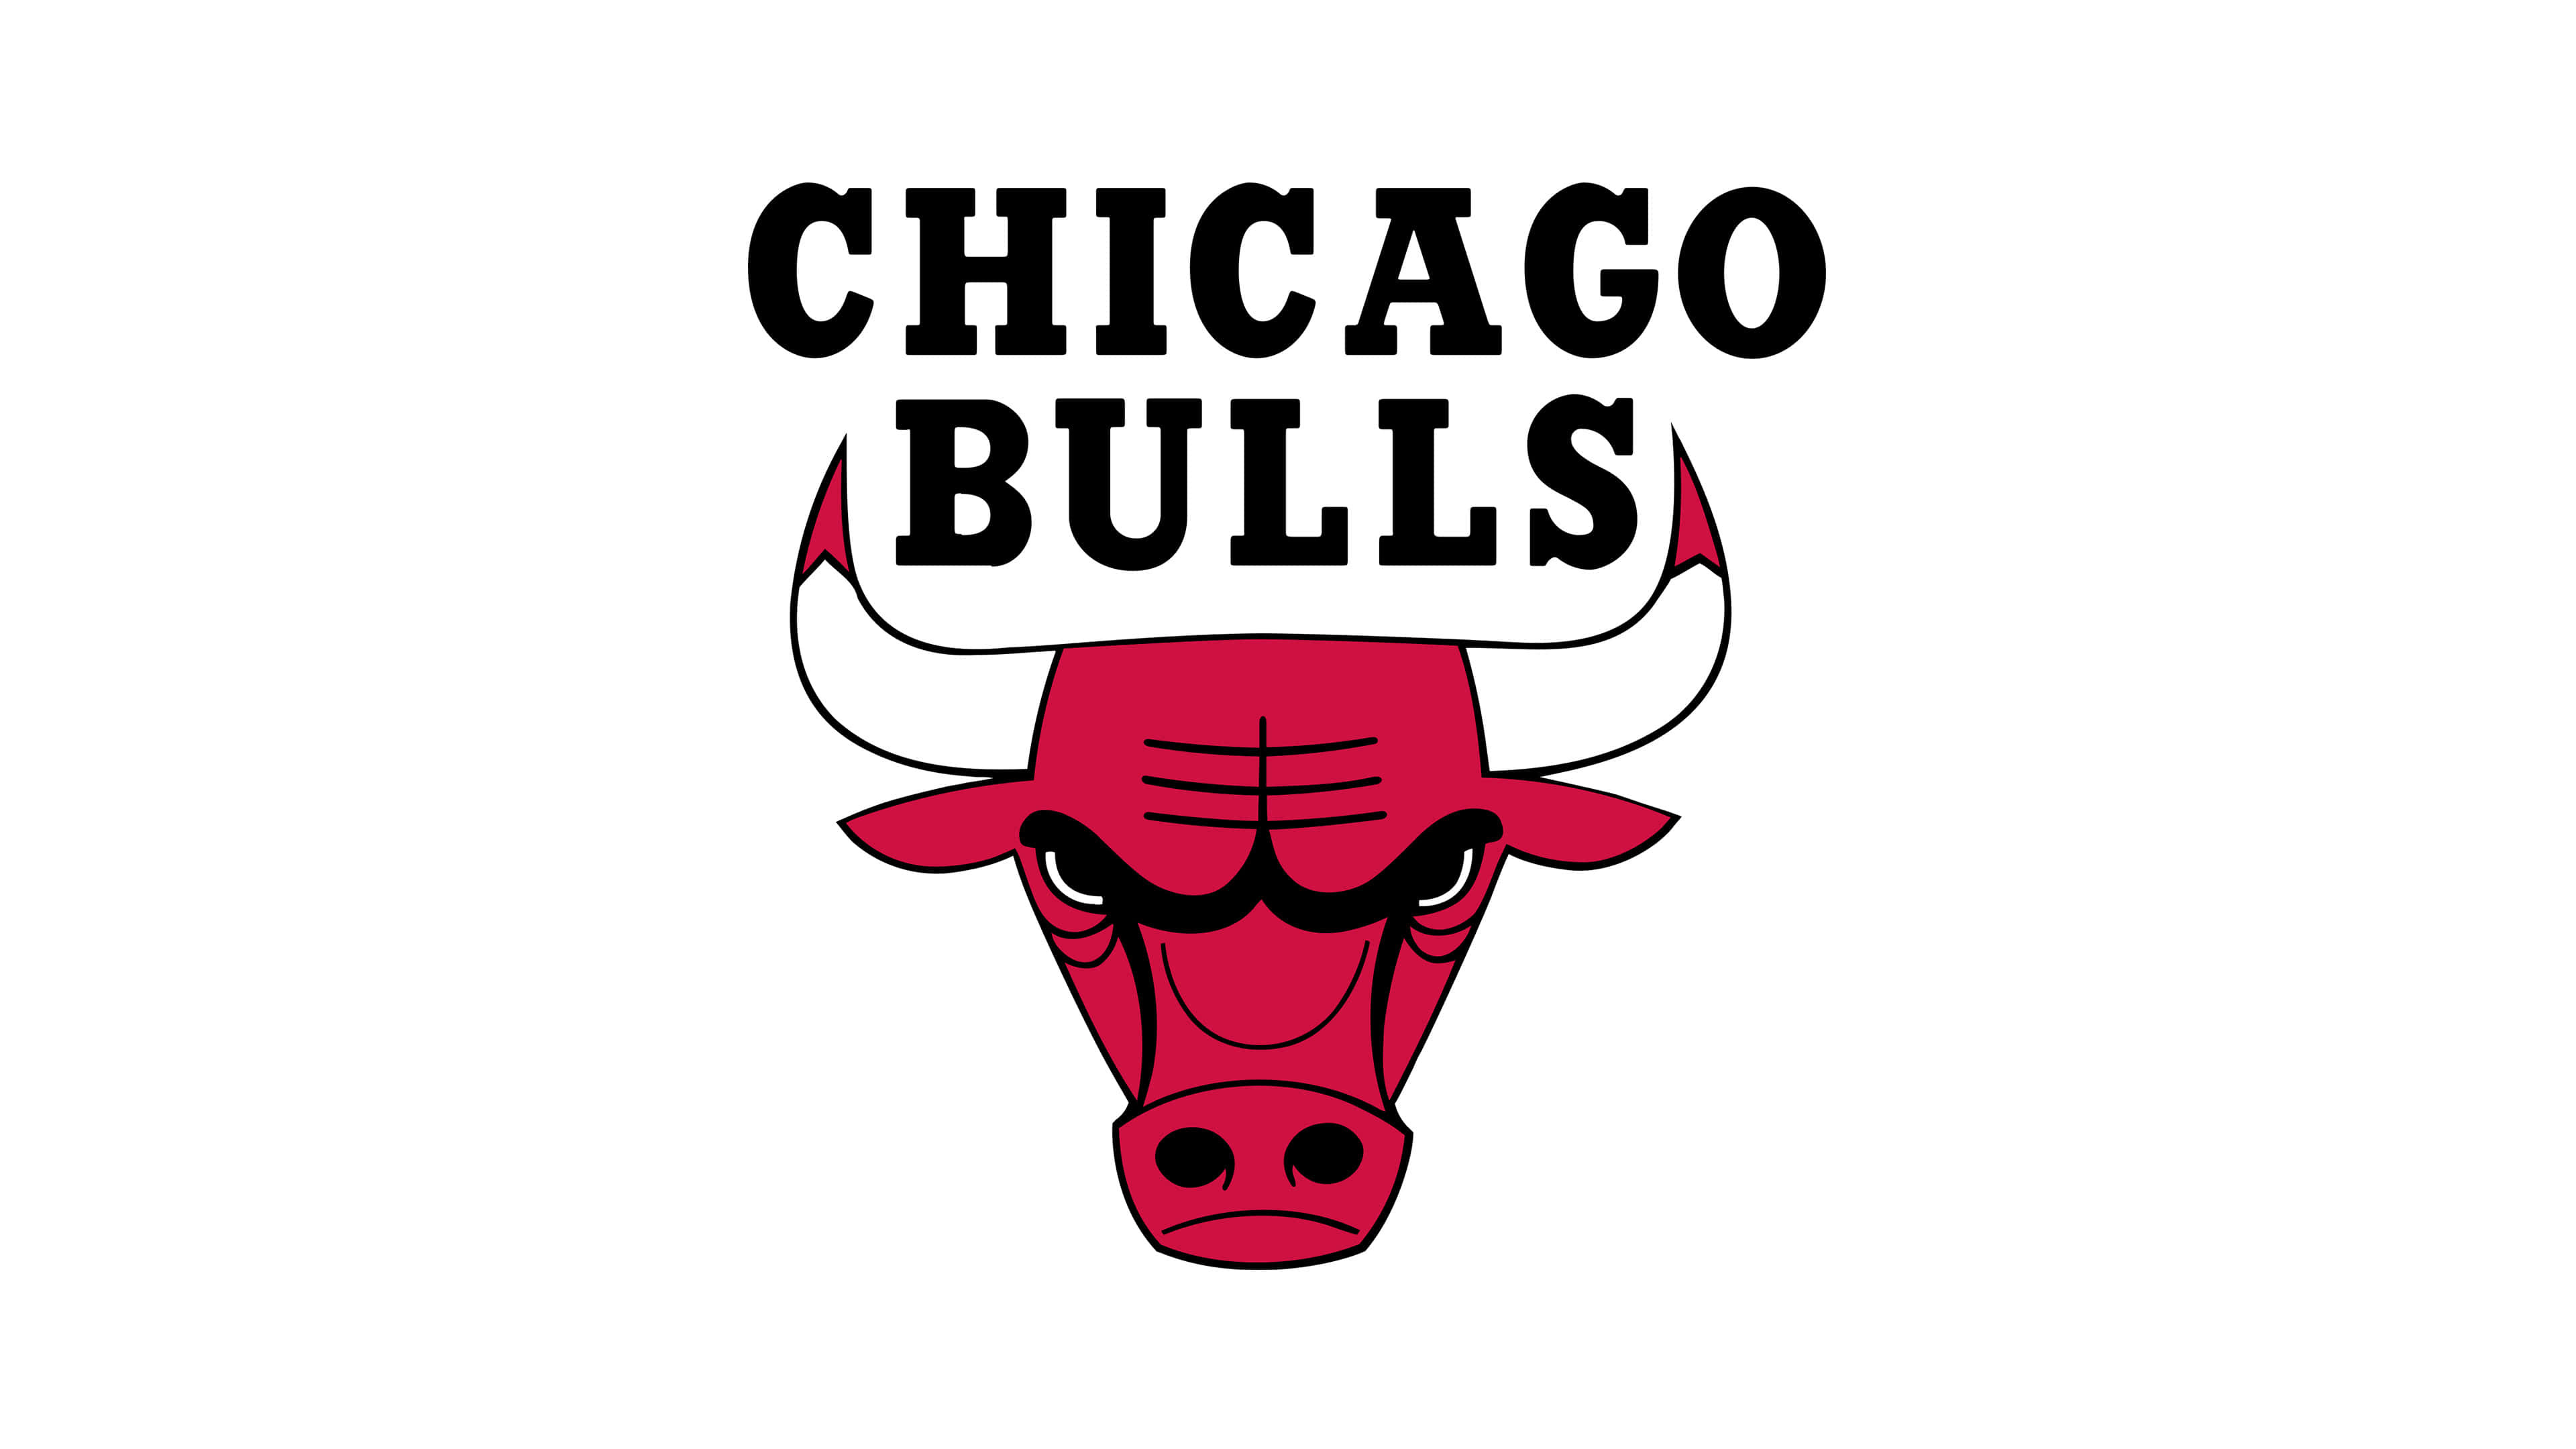 Chicago Bulls: The team was founded on January 16, 1966, NBA basketball. 3840x2160 4K Wallpaper.